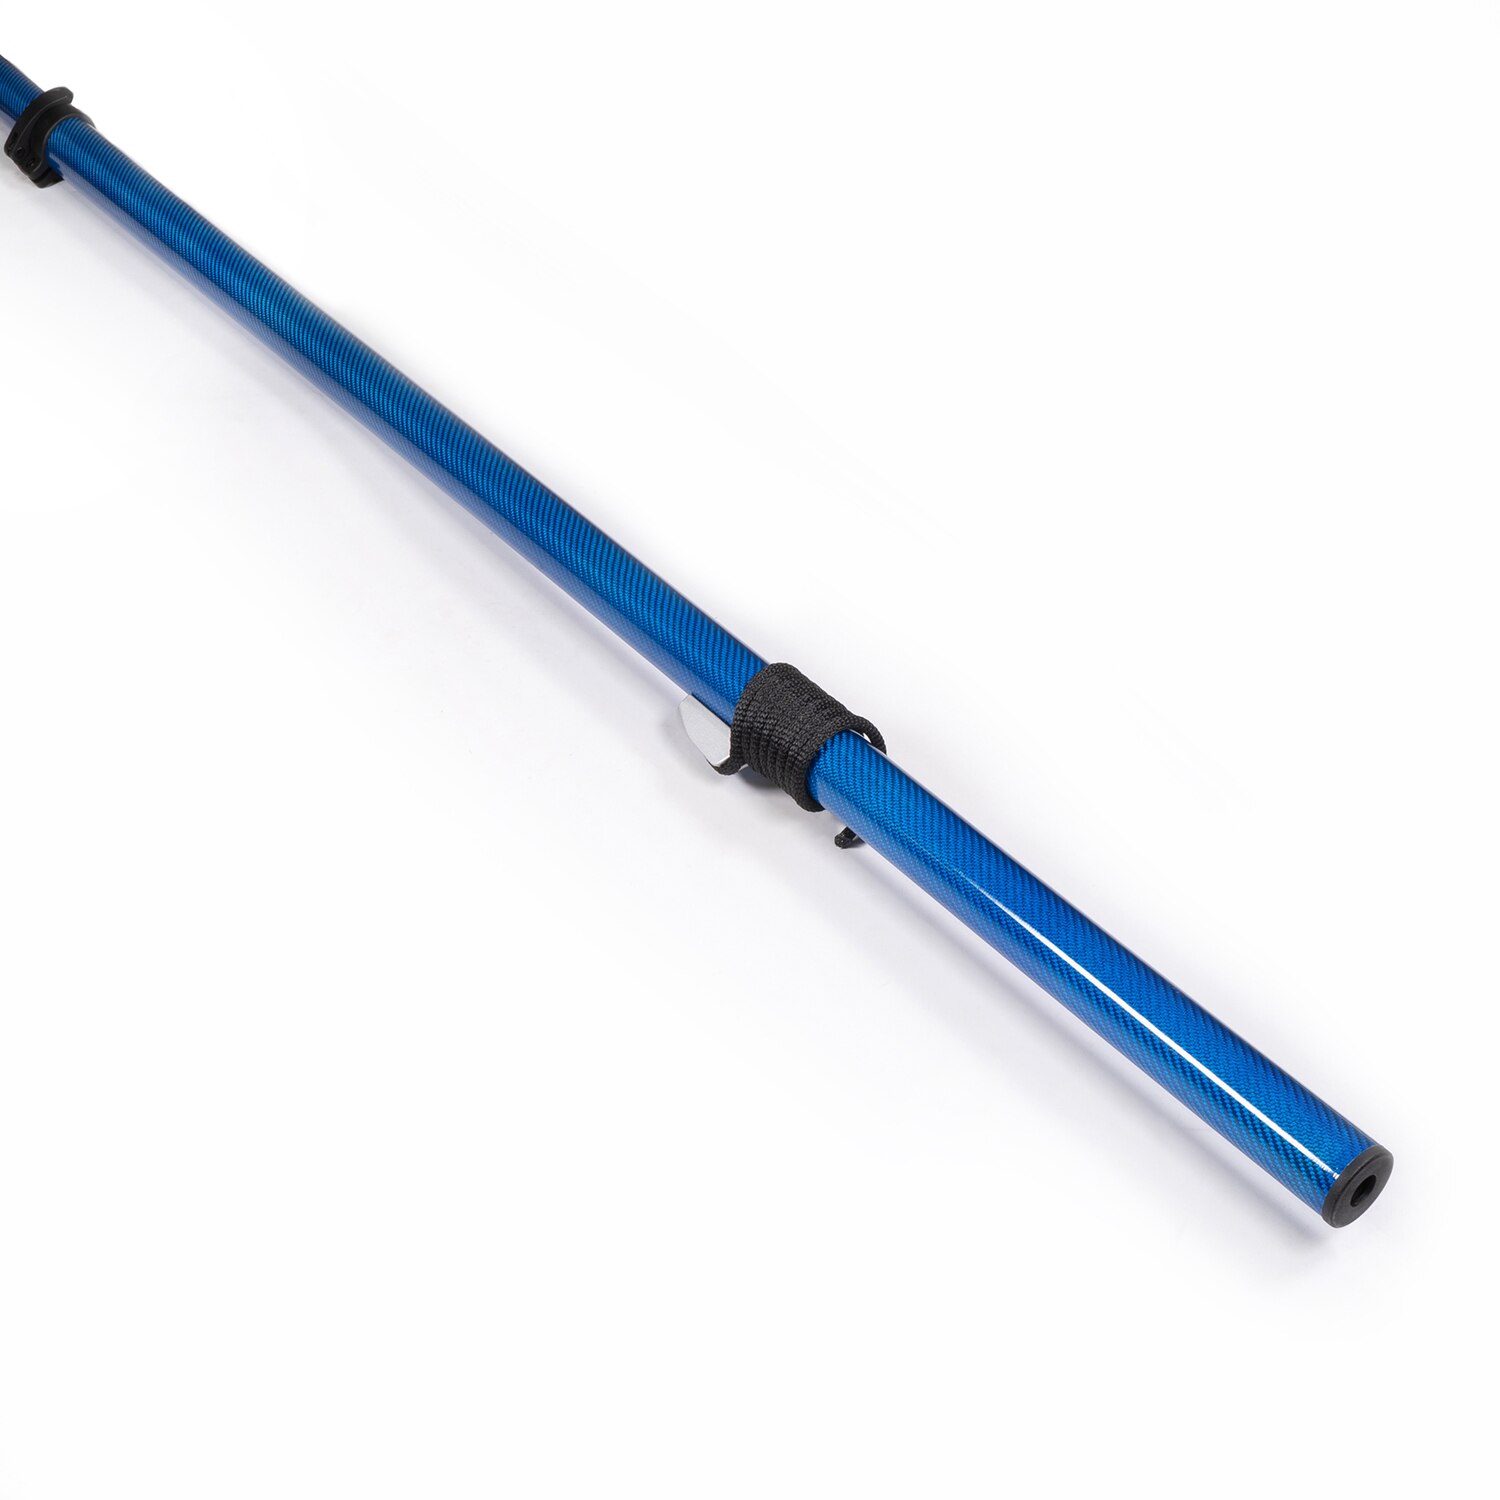 Shade Pole Marine Carbiepole Carbon Fiber Blue 1.5 Diameter 68 to 88  with Bag (1 Each is 1 Pair)